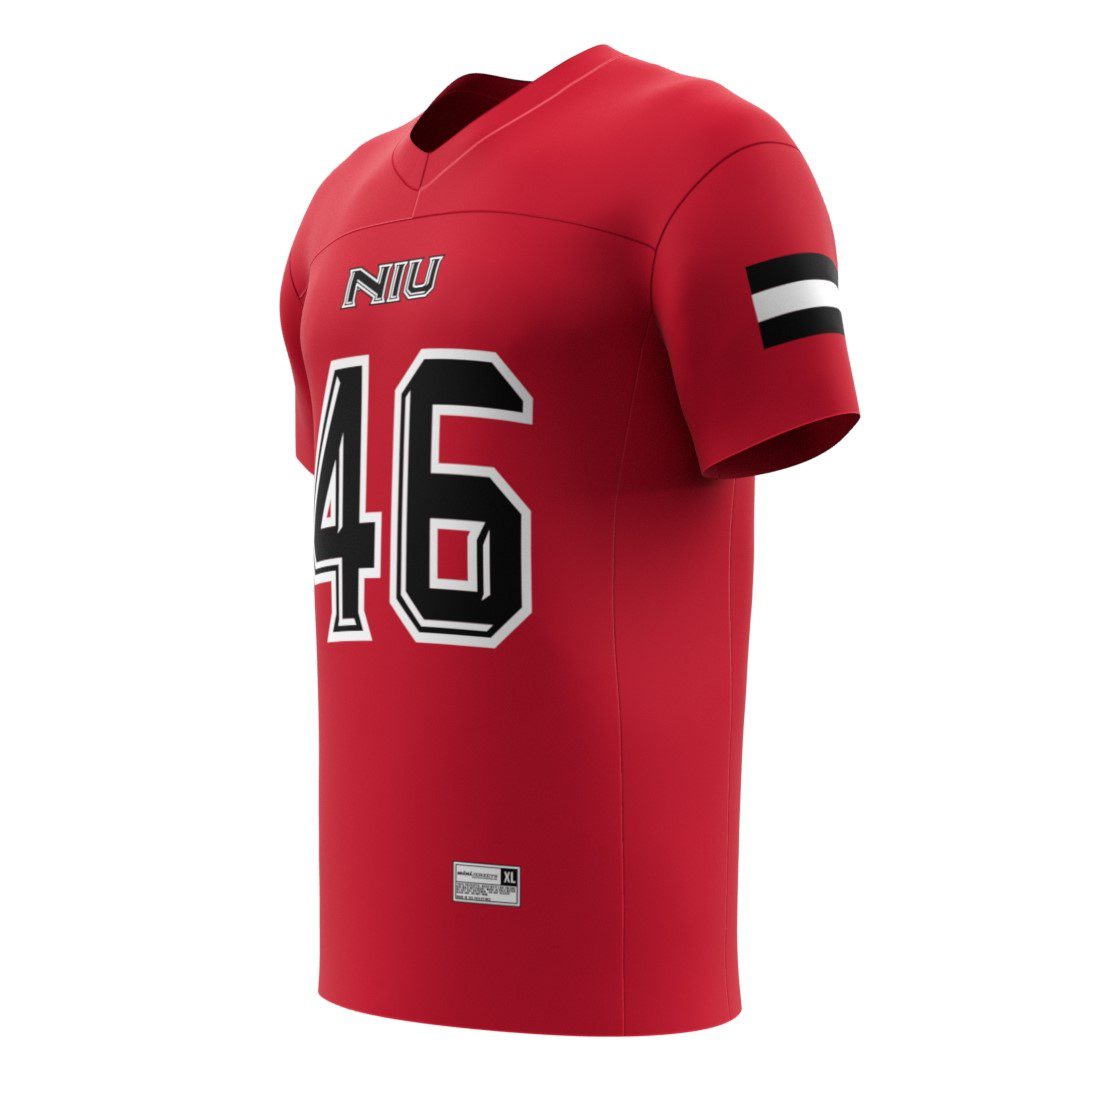 Nathan Ruble NIU Replica Red Jersey Side